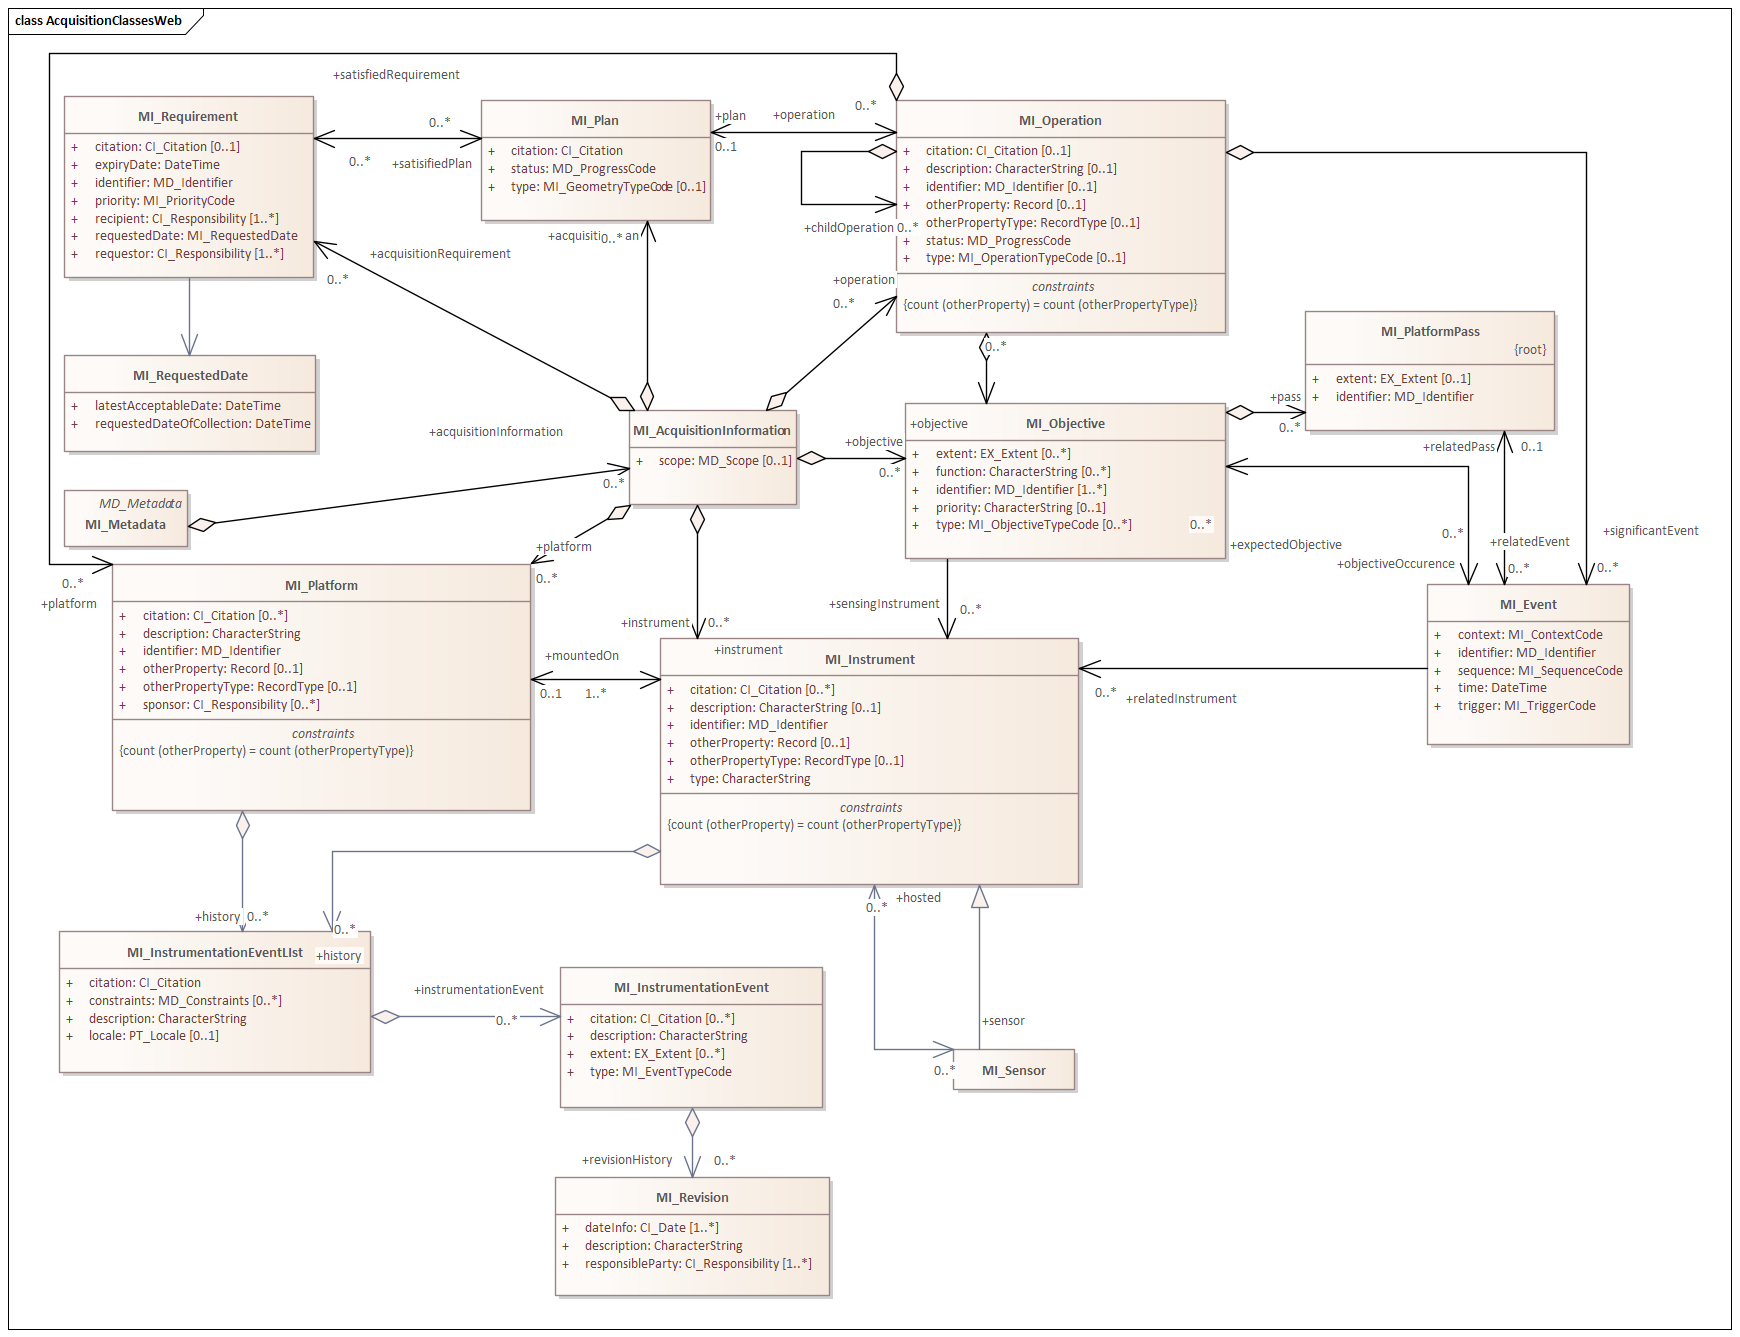 Thumbnail of Metadata for ACquisition UML and attributes